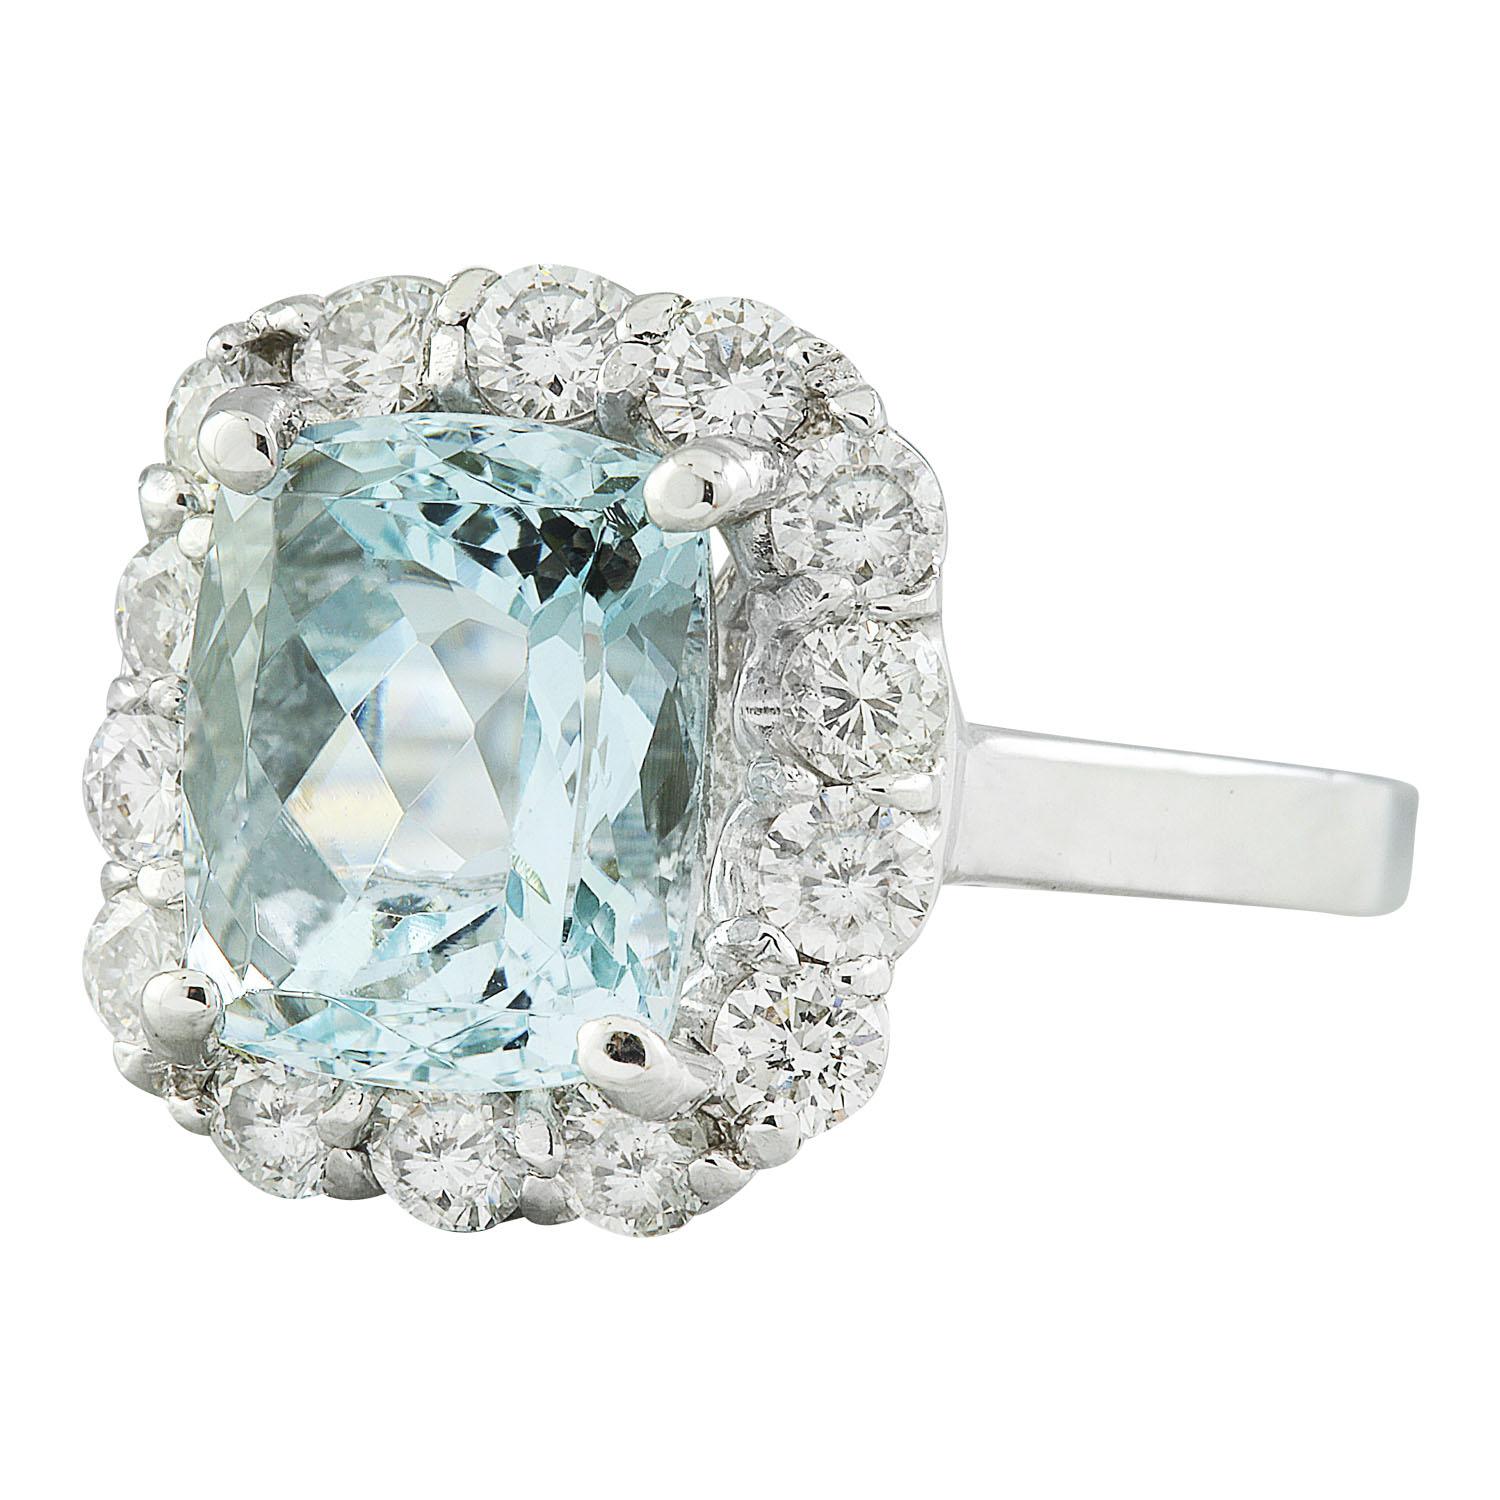 4.55 Carat Natural Aquamarine 14 Karat Solid White Gold Diamond Ring
Stamped: 14K 
Total Ring Weight: 5.5 Grams 
Aquamarine Weight 3.50 Carat (10.00x8.00 Millimeters)
Diamond Weight: 1.05 carat (F-G Color, VS2-SI1 Clarity)
Face Measures: 14.20x13.15